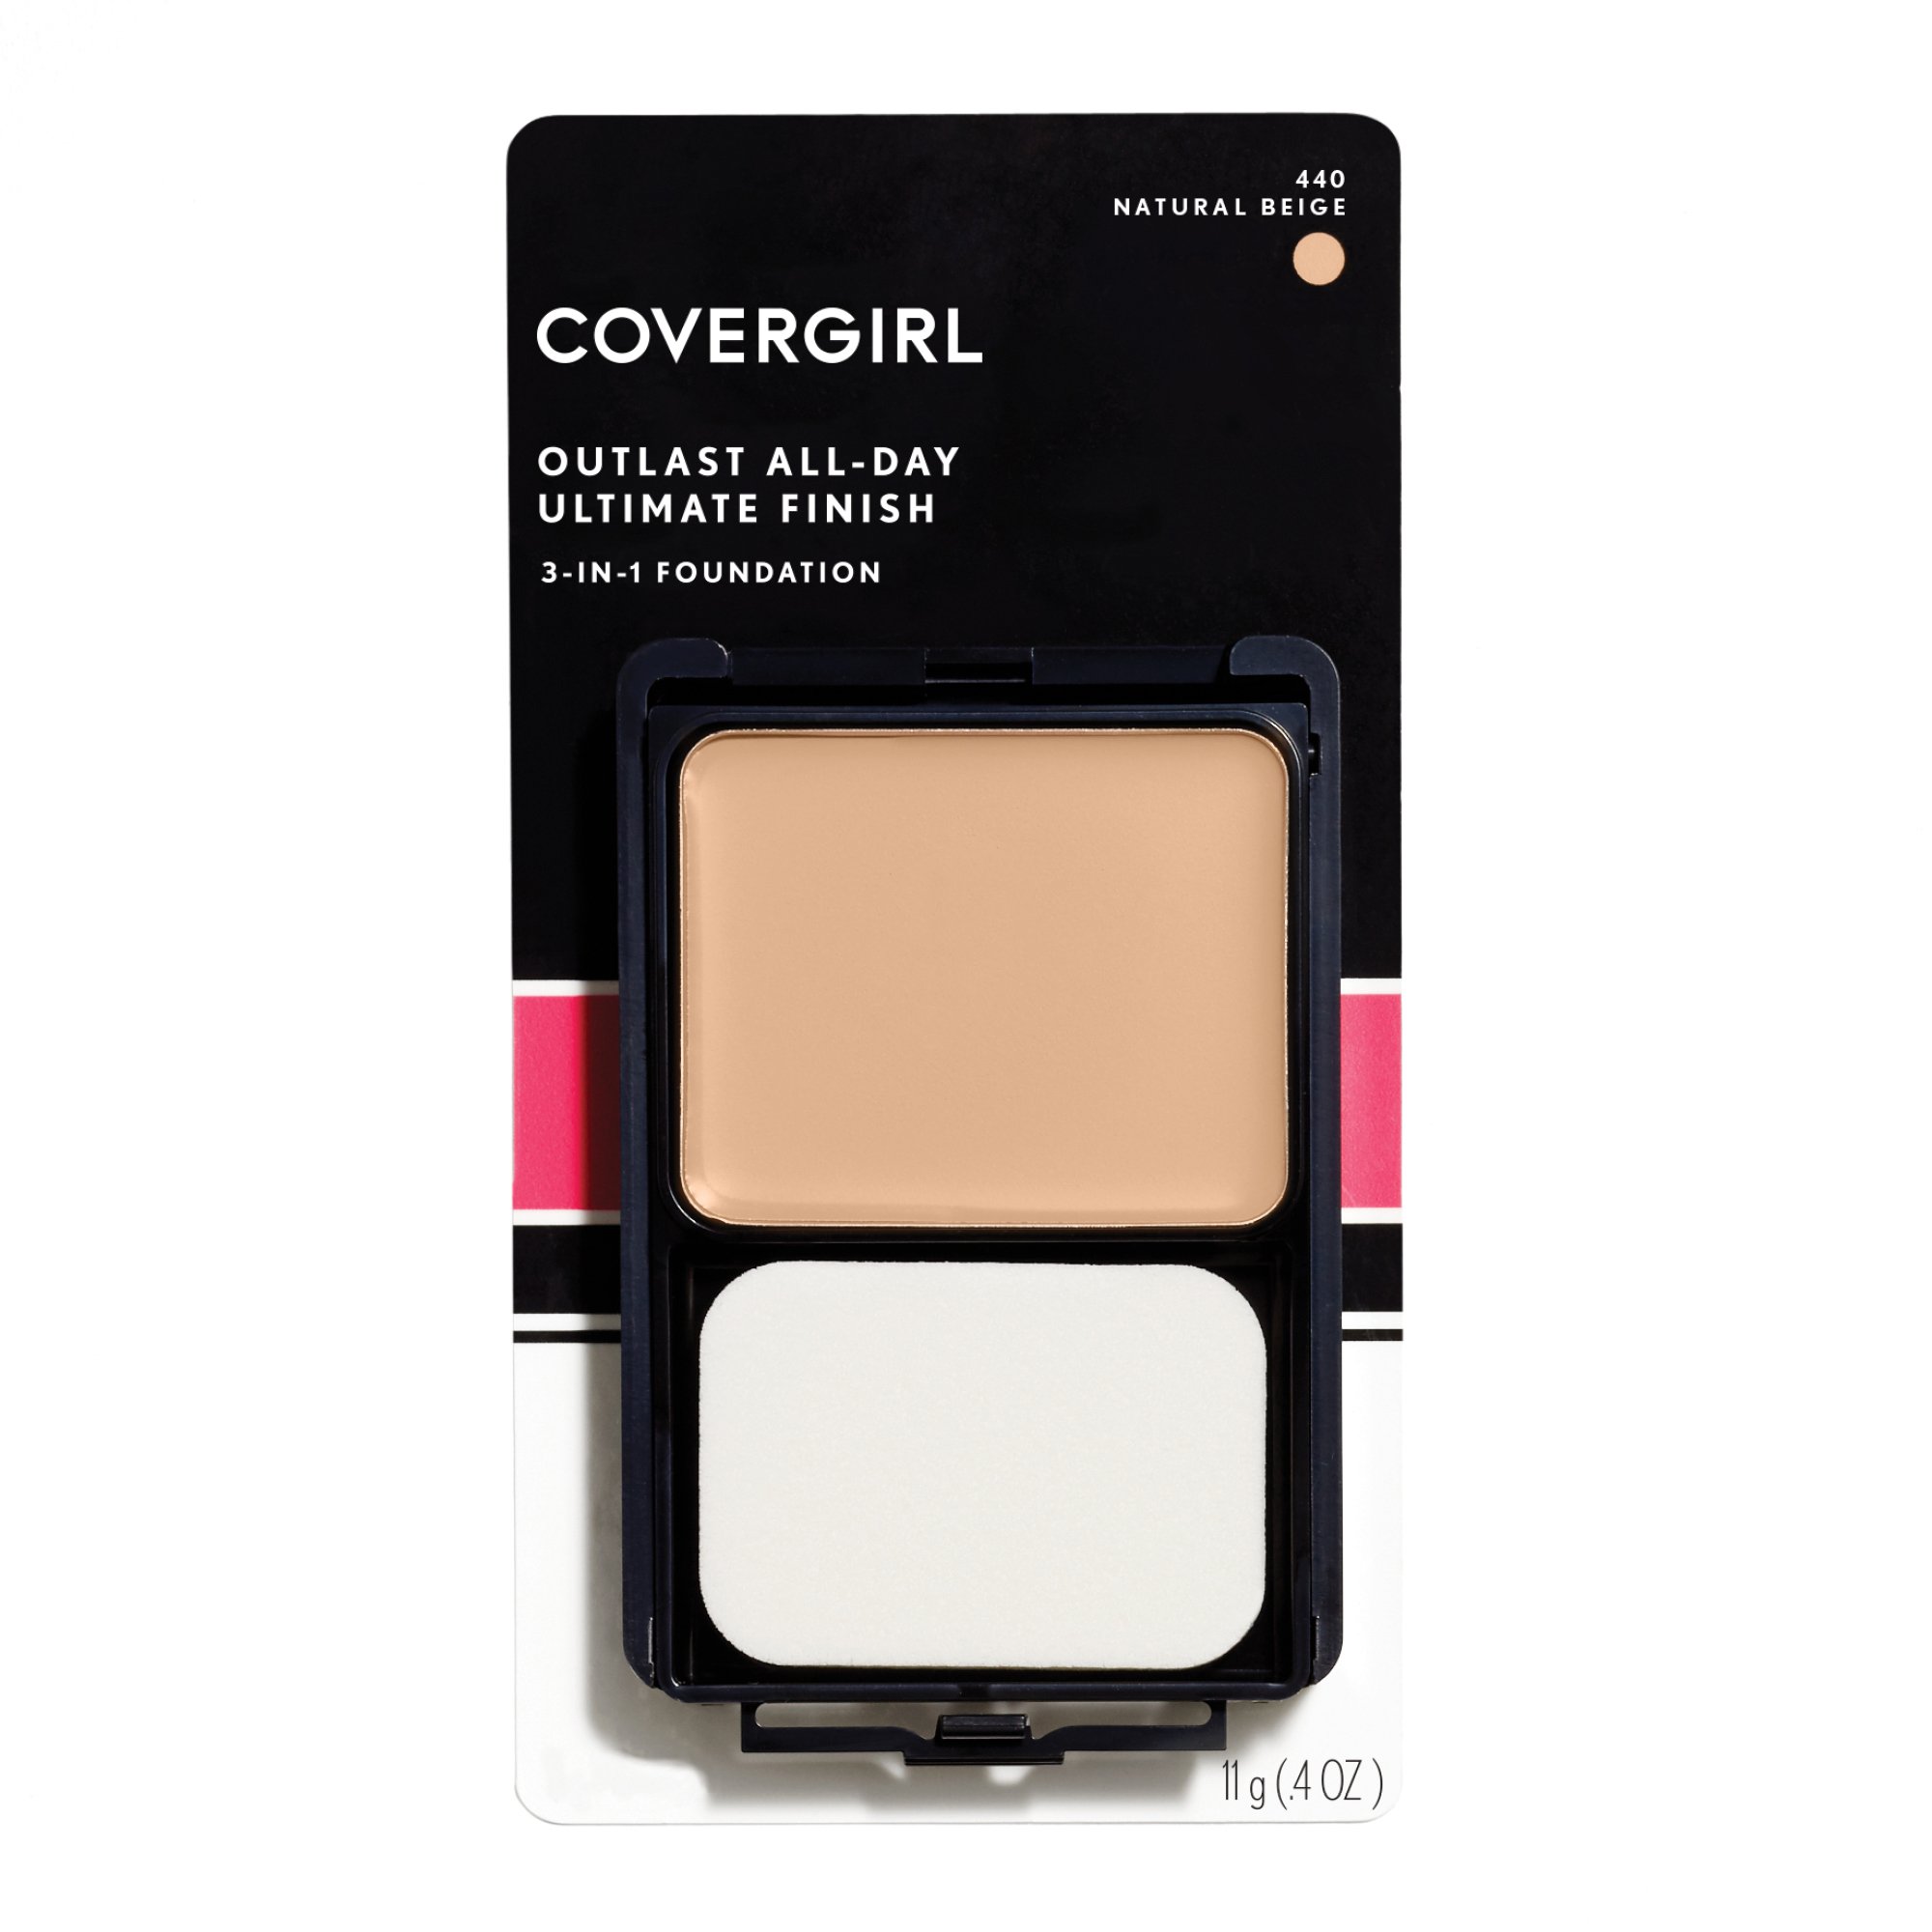 COVERGIRL Outlast All-Day Ultimate Finish Foundation, Natural Beige , 0.4 Ounce (Pack of 1)